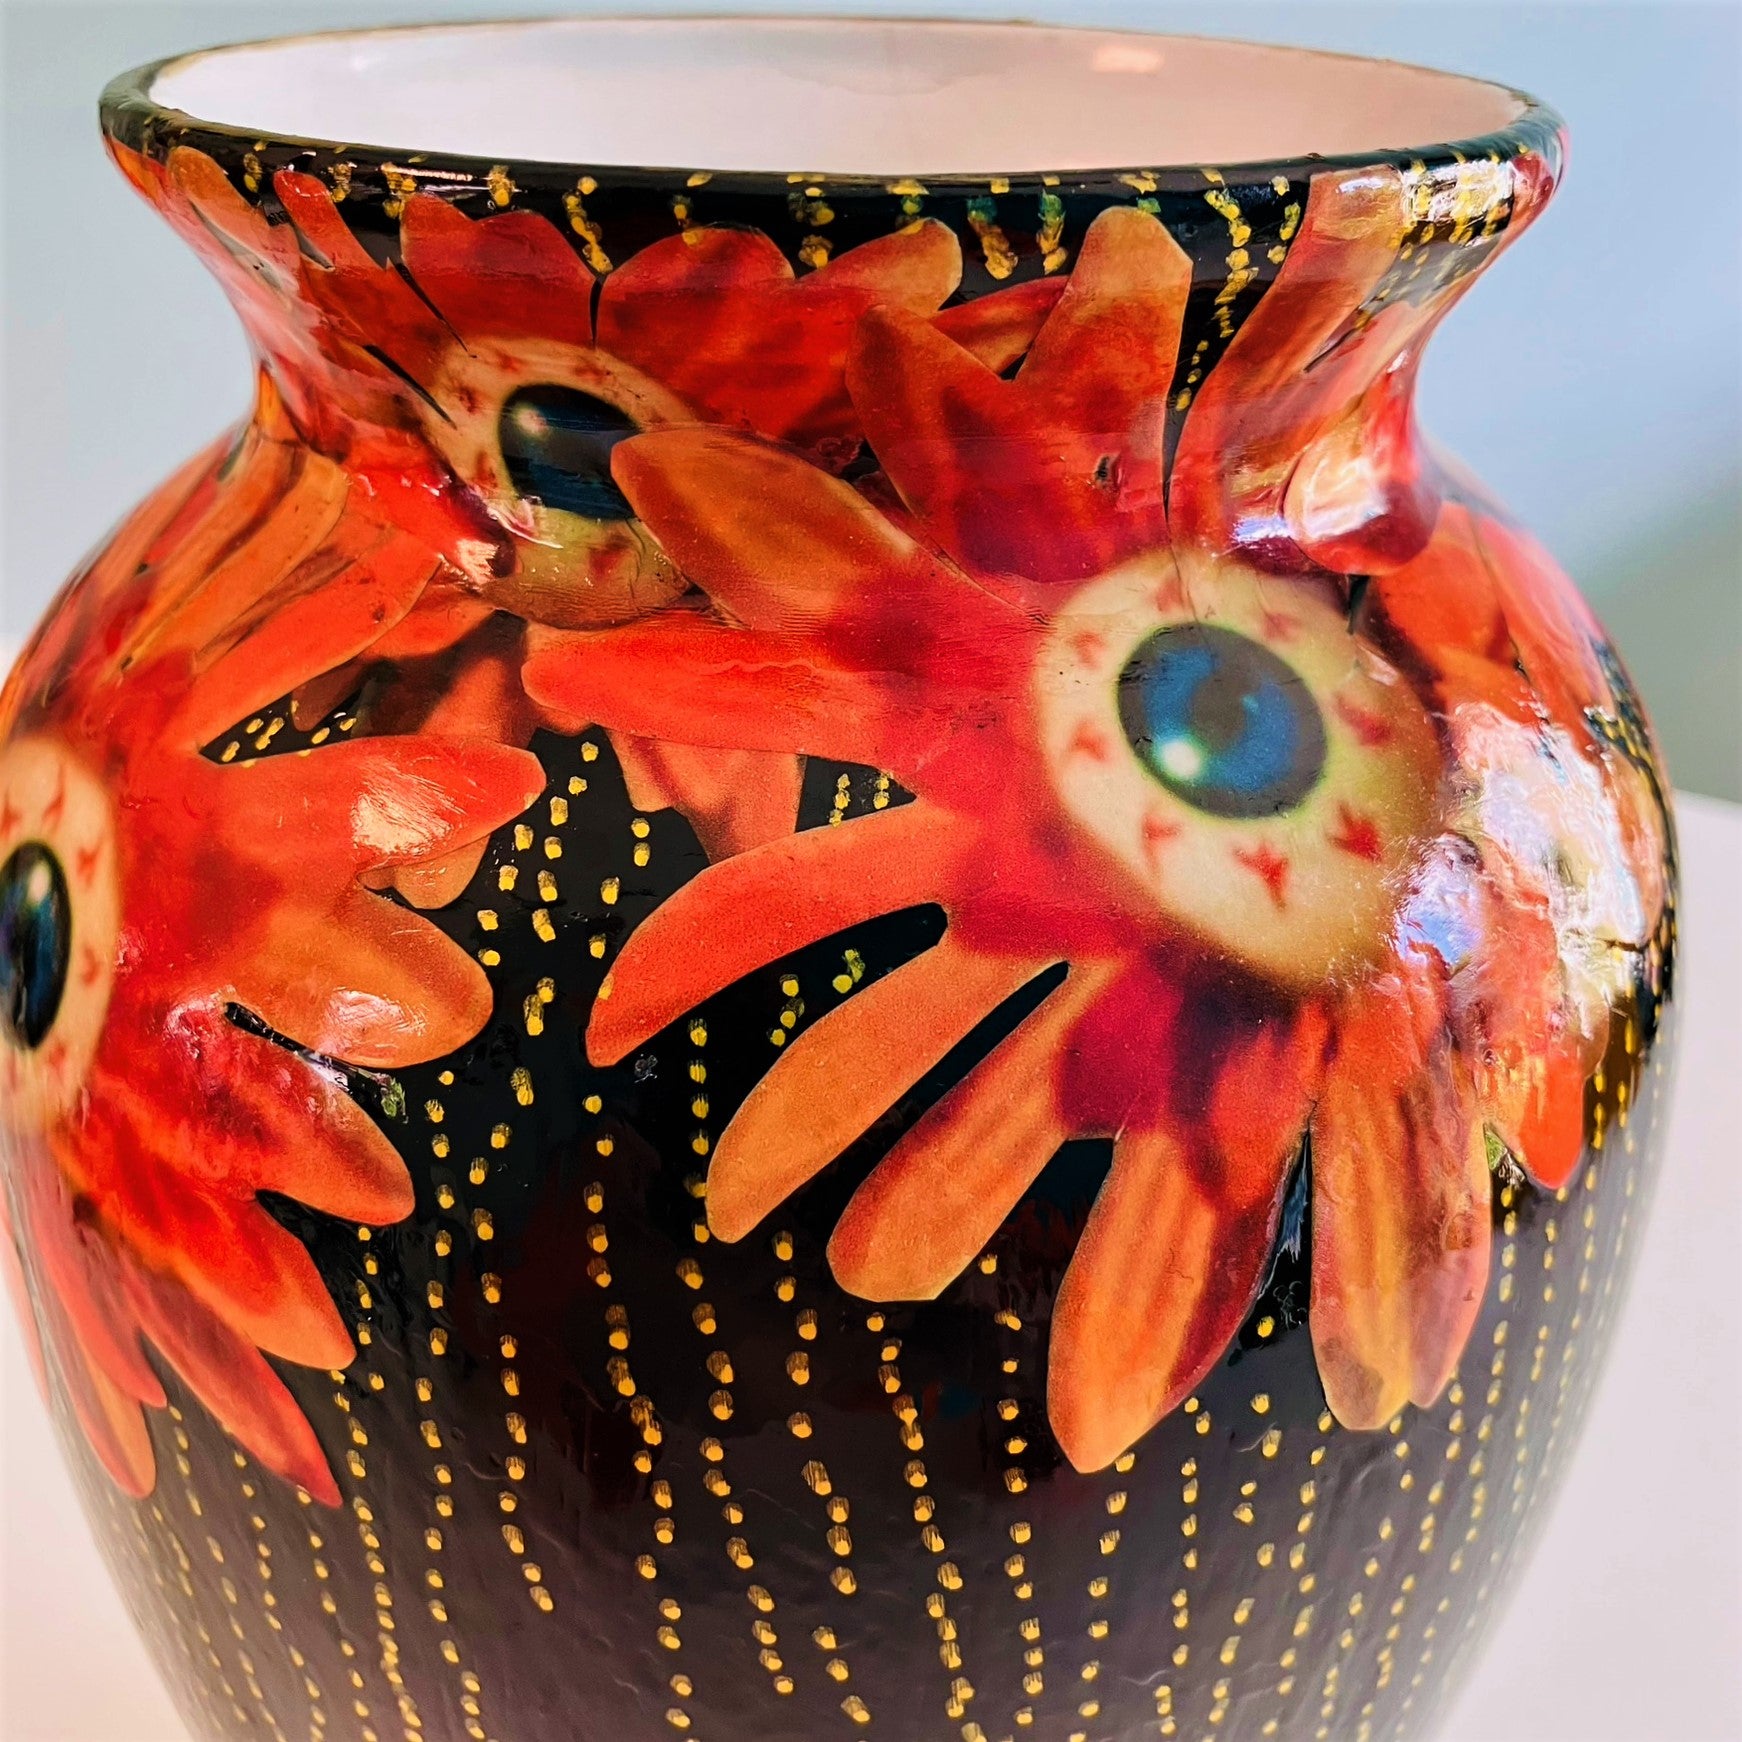 "Starey Flowers" Flower Vase by House of Frisson, featuring a collage of flowers with eyeballs, on a black background. Closeup detail of the flowers.